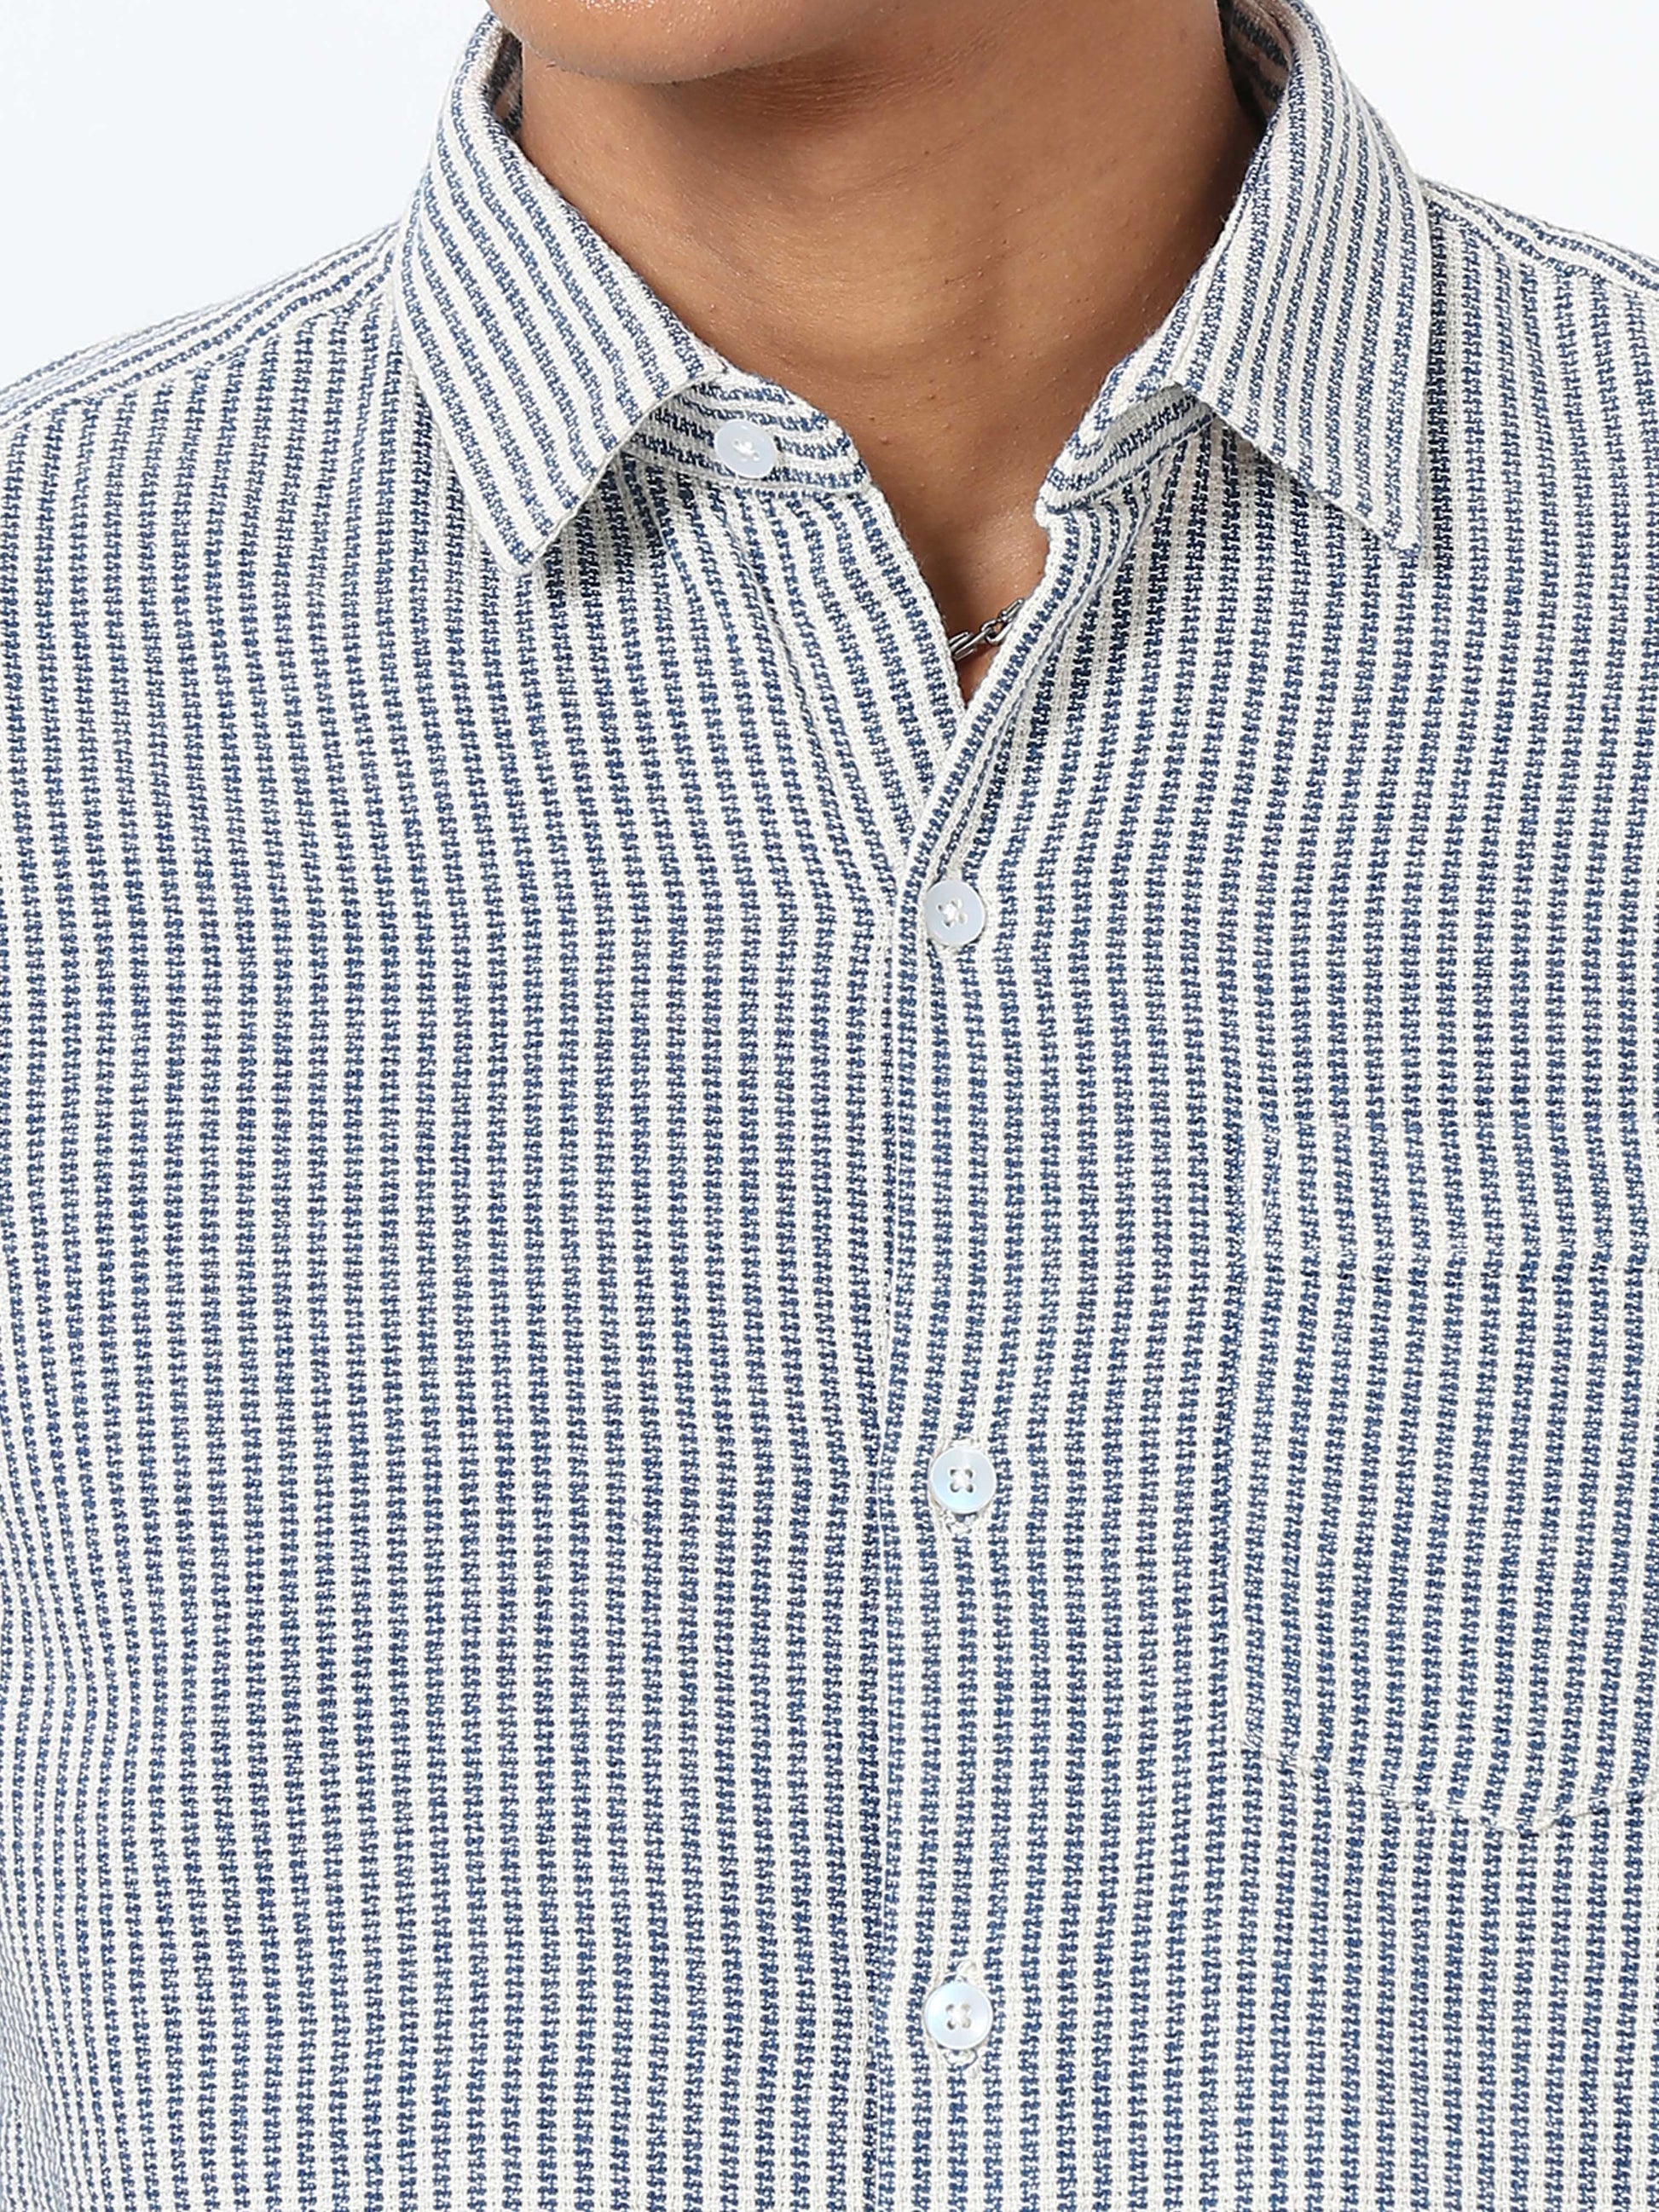 White and Blue striped shirt half sleeve